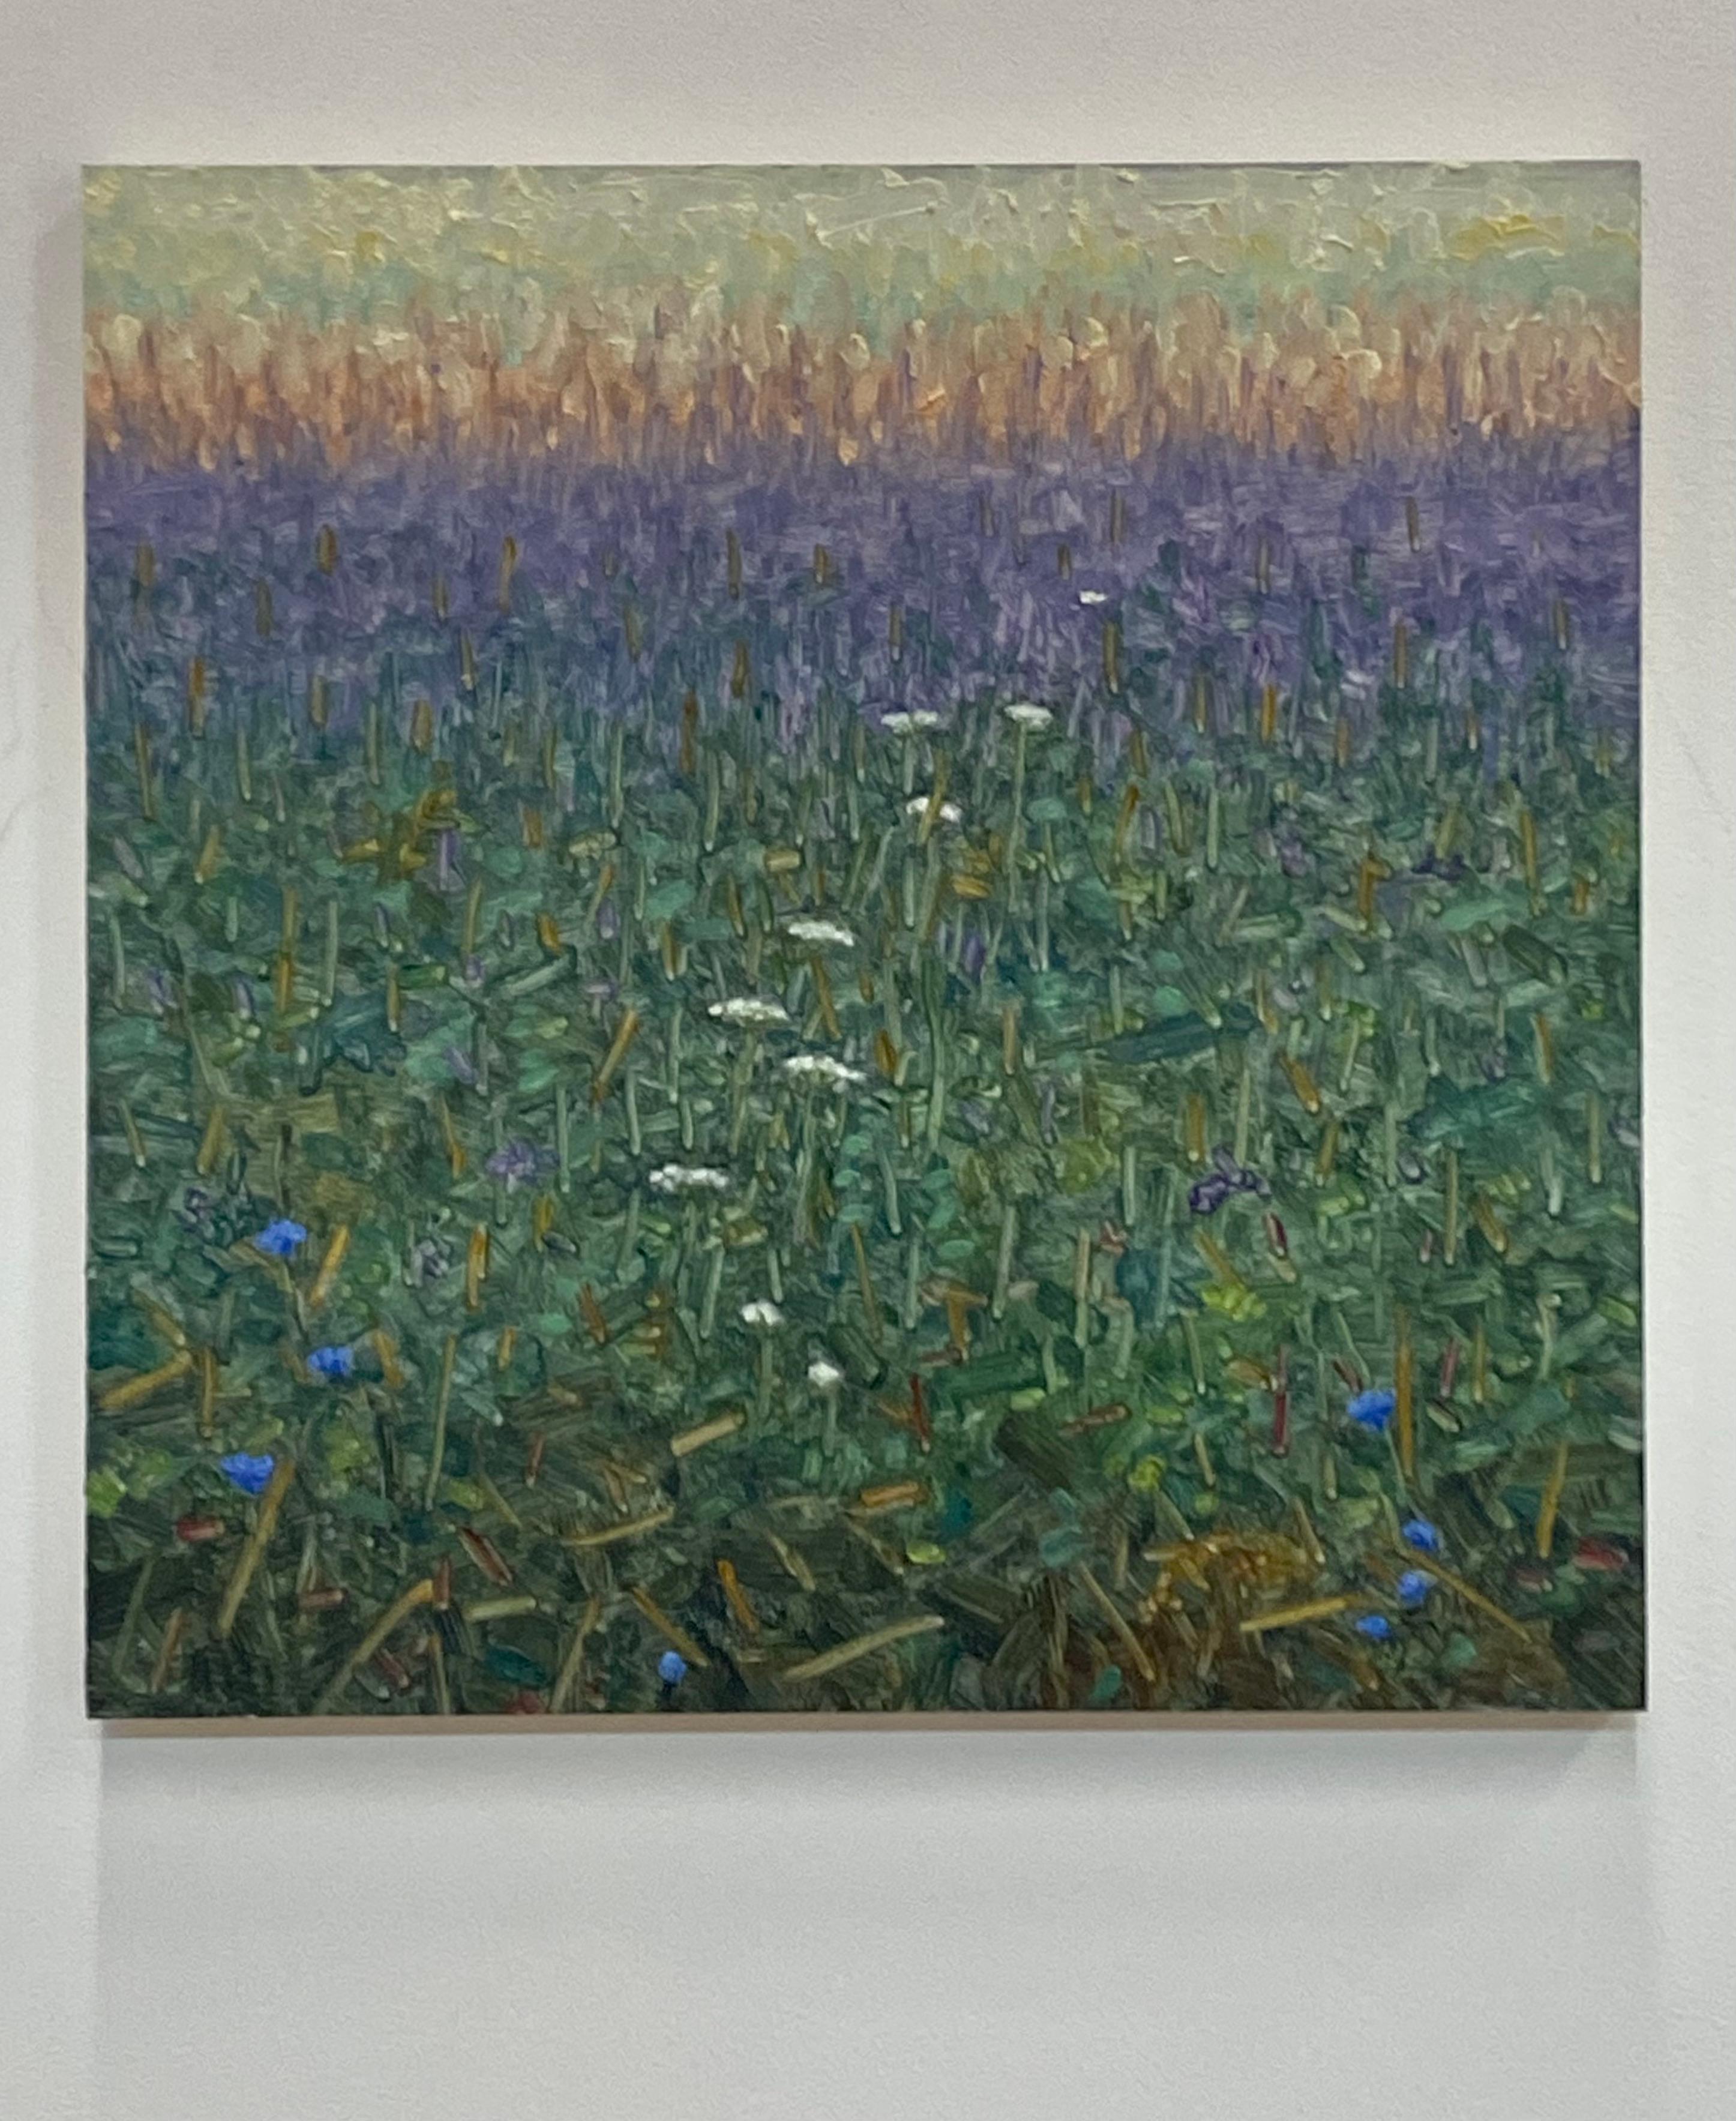 Field Painting August 3 2021, Purple, White, Blue Lavender Flowers Green Grass - Gray Landscape Painting by Thomas Sarrantonio